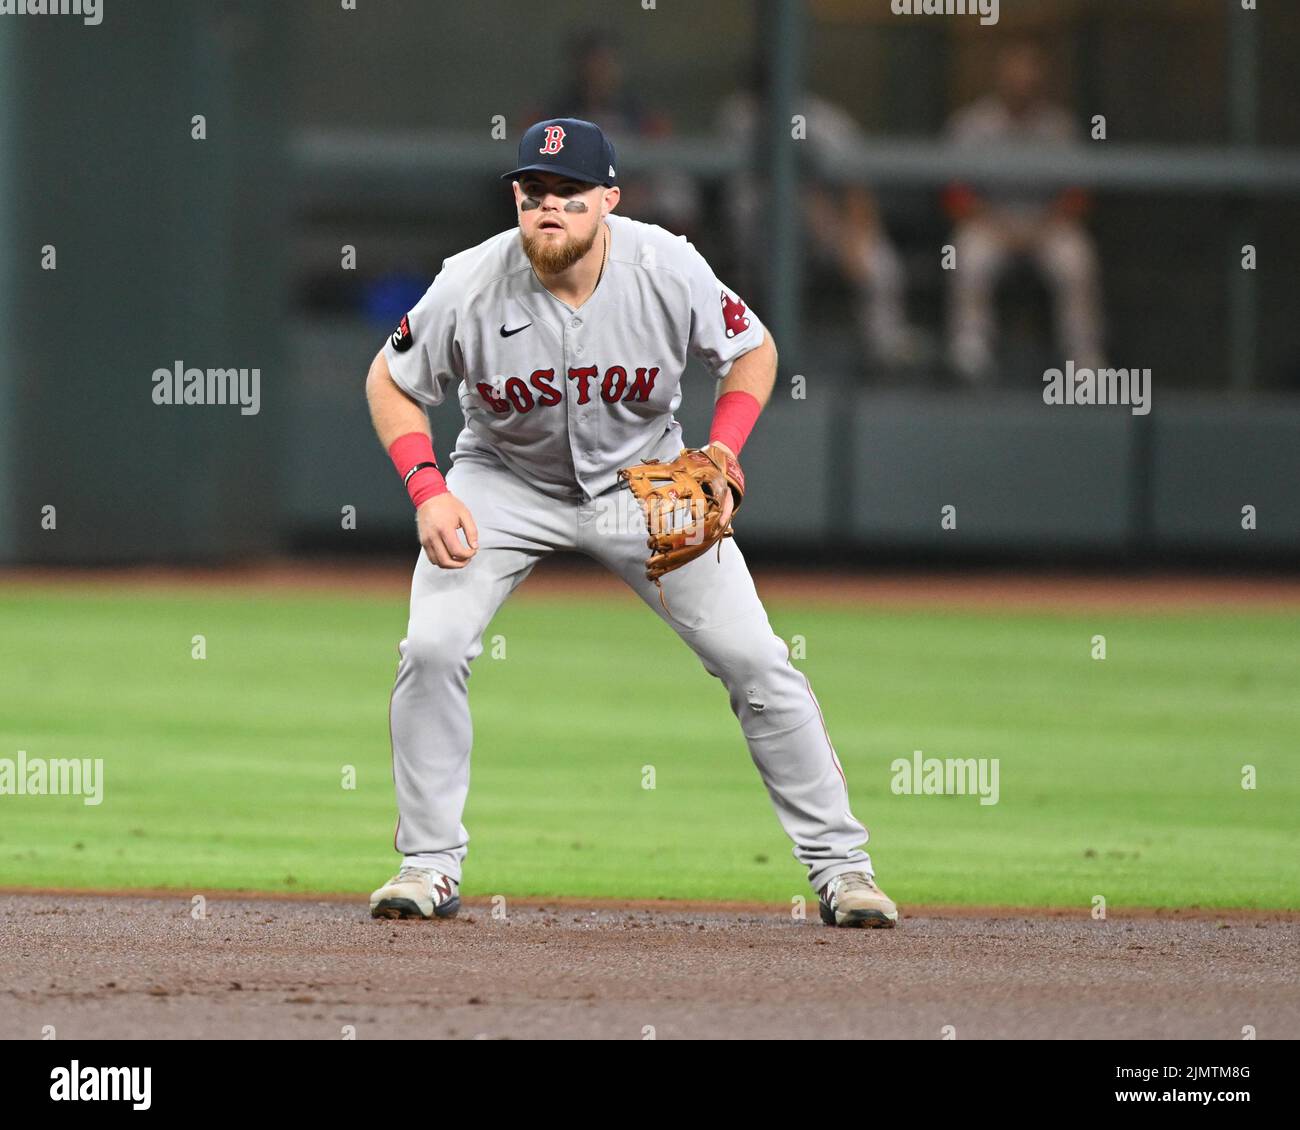 Boston Red Sox shortstop Christian Arroyo (39) gets set in the first inning of the MLB game between the Boston Red Sox and the Houston Astros on Tuesd Stock Photo